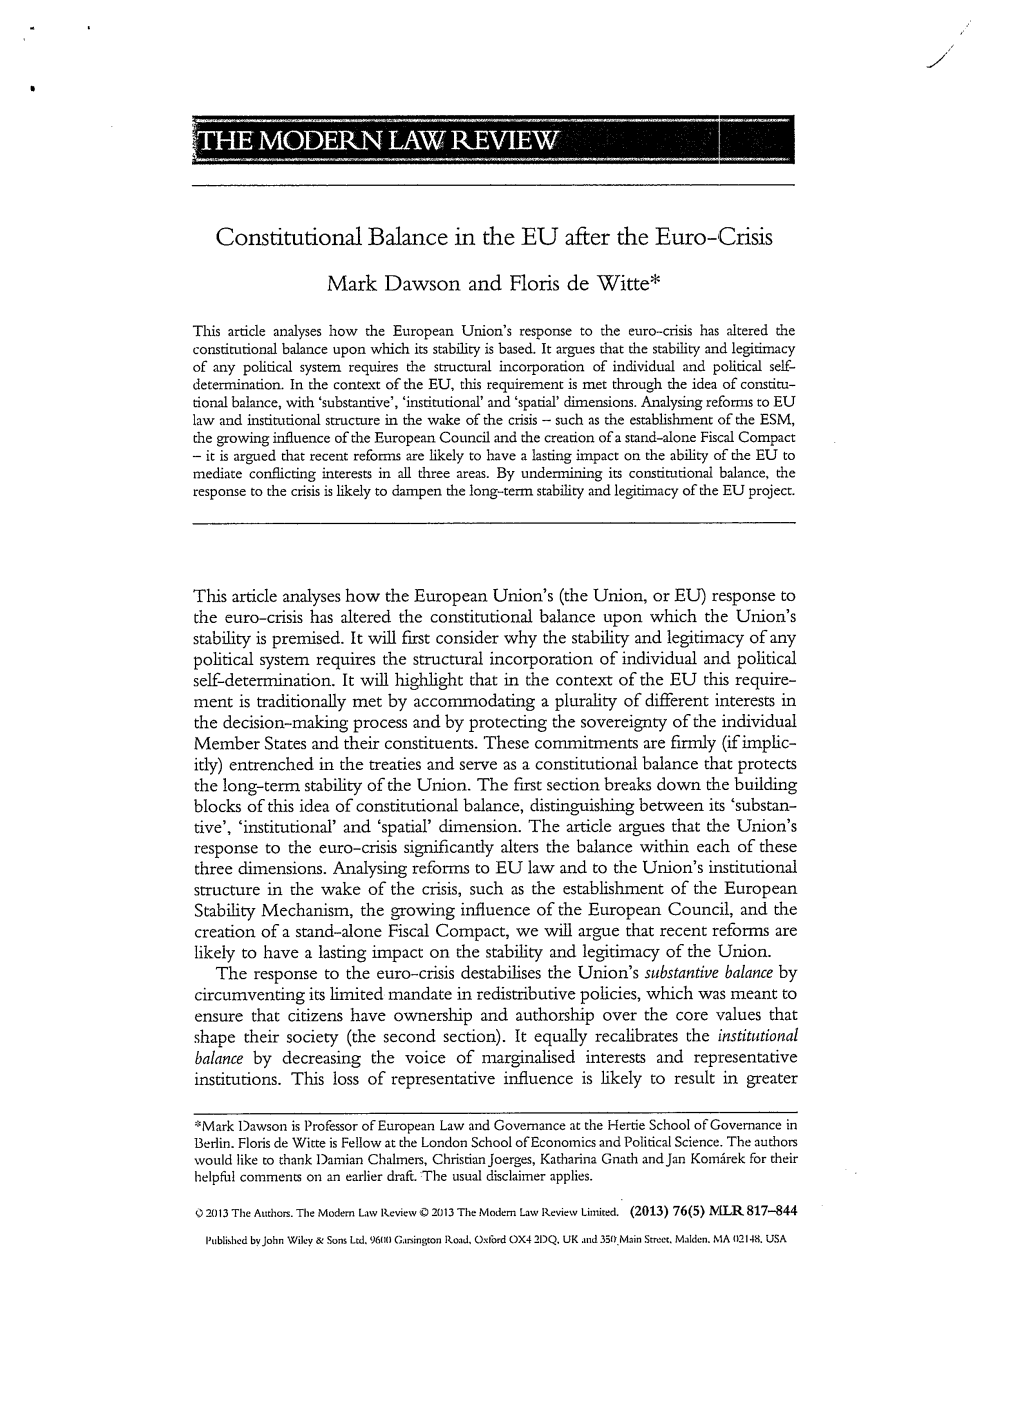 Constitutional Balance in the EU After the Euro-Crisis